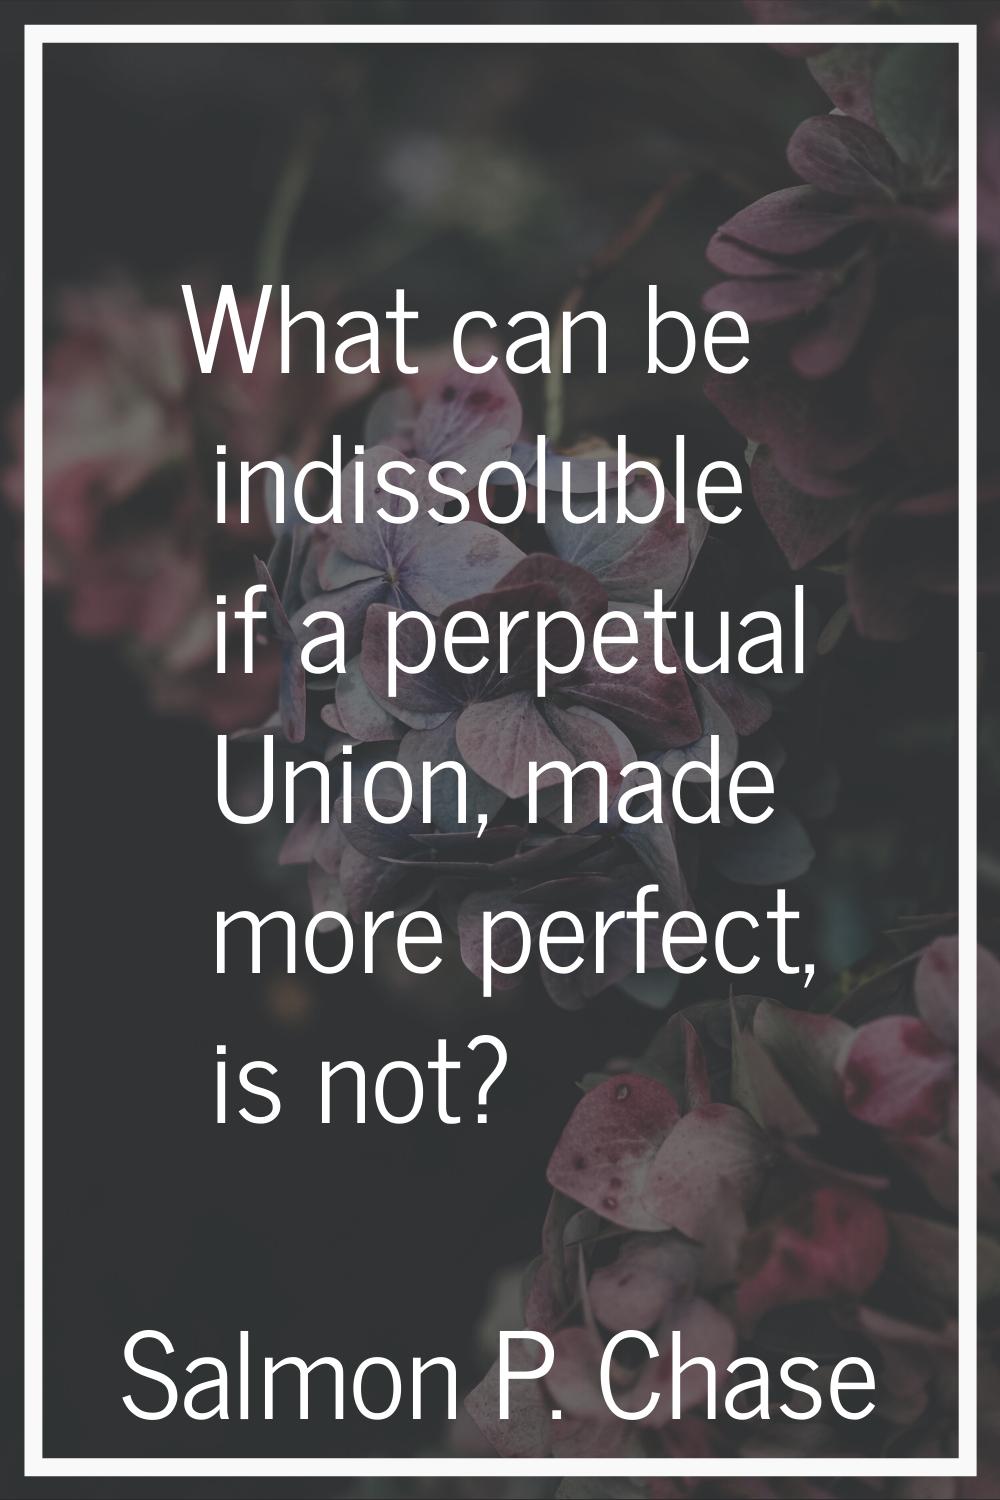 What can be indissoluble if a perpetual Union, made more perfect, is not?